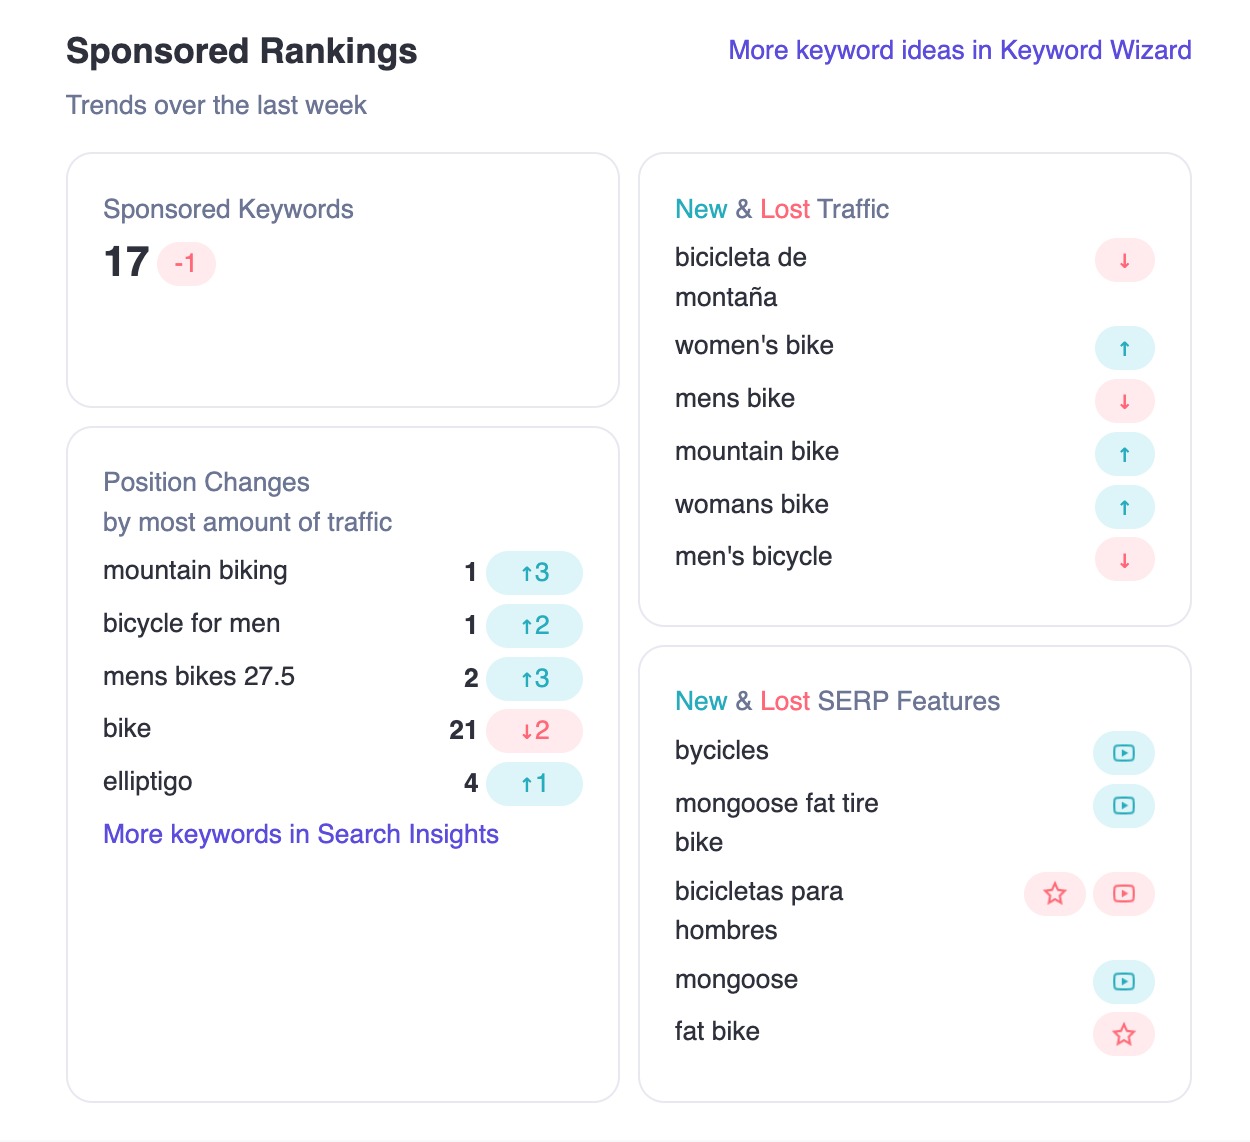 A screen capture of the email report shows the “Sponsored Rankings” section. There are four columns. There are data on Sponsored Keywords, Position Changes by most amount of traffic, New and Lost Traffic, and New and Lost SERP Features. 